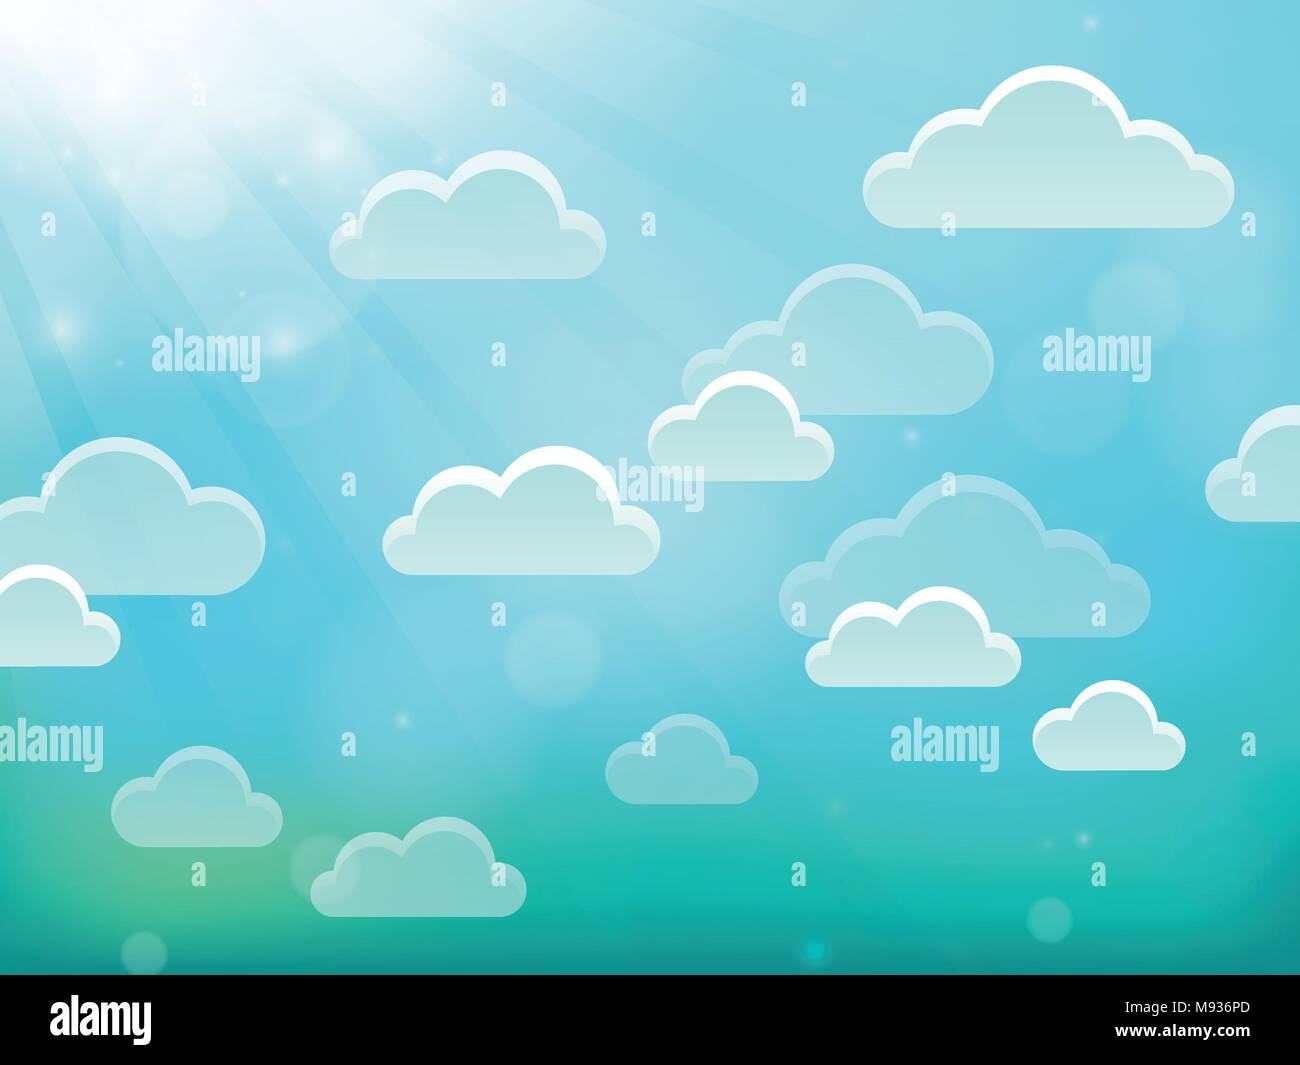 Clouds on sky theme 4 - eps10 vector illustration. Stock Vector